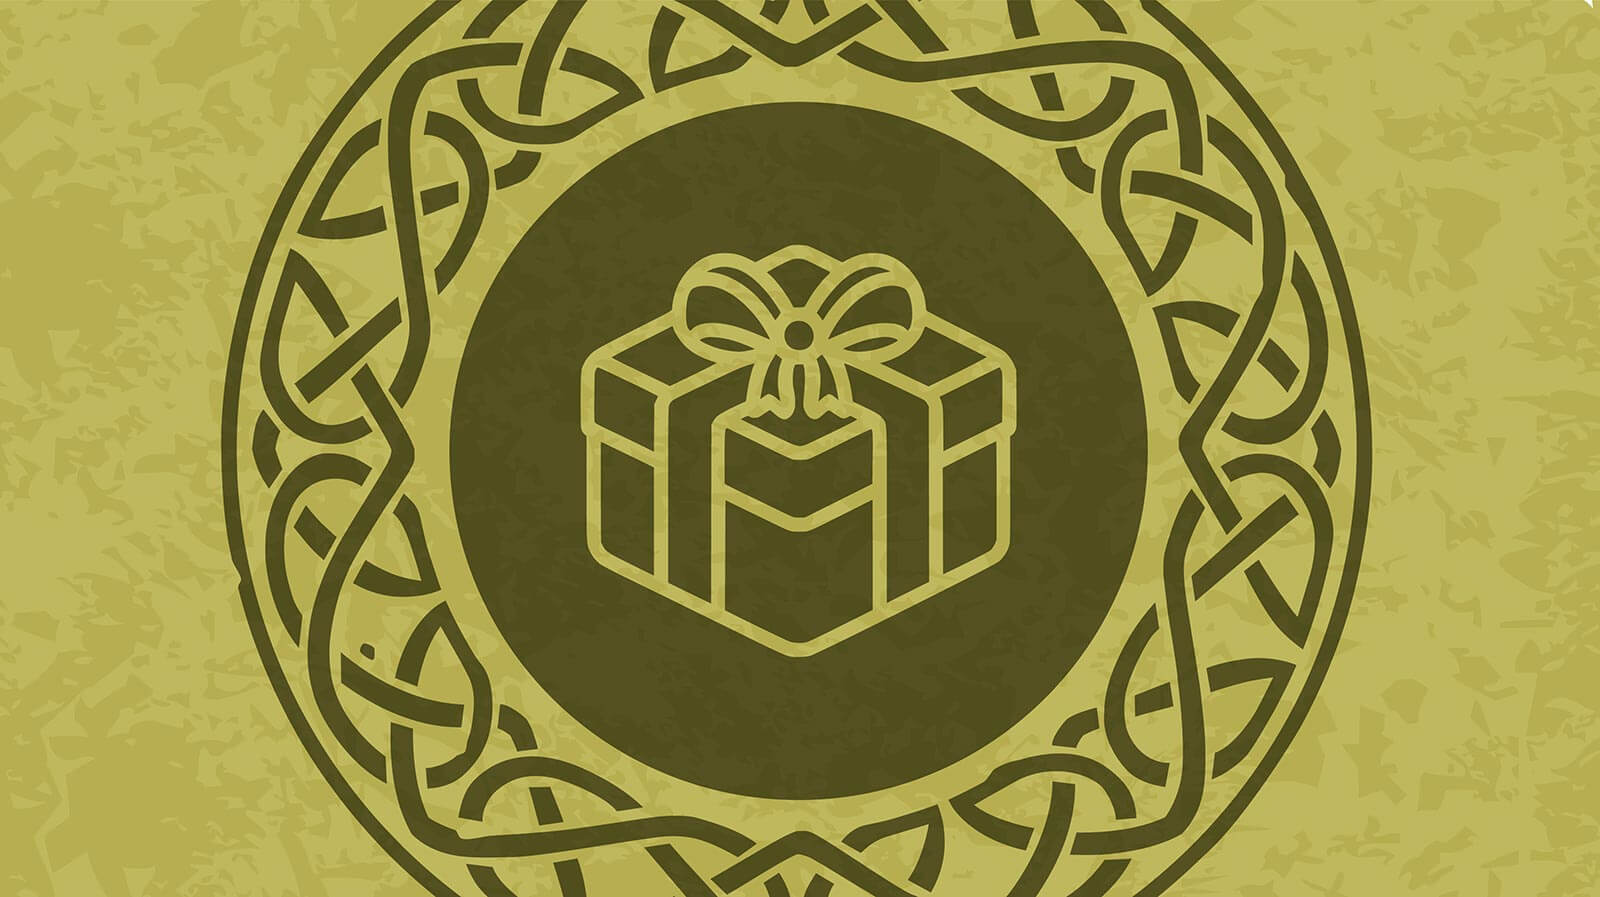 Illustration of elven pattern with a gift box and ribbon